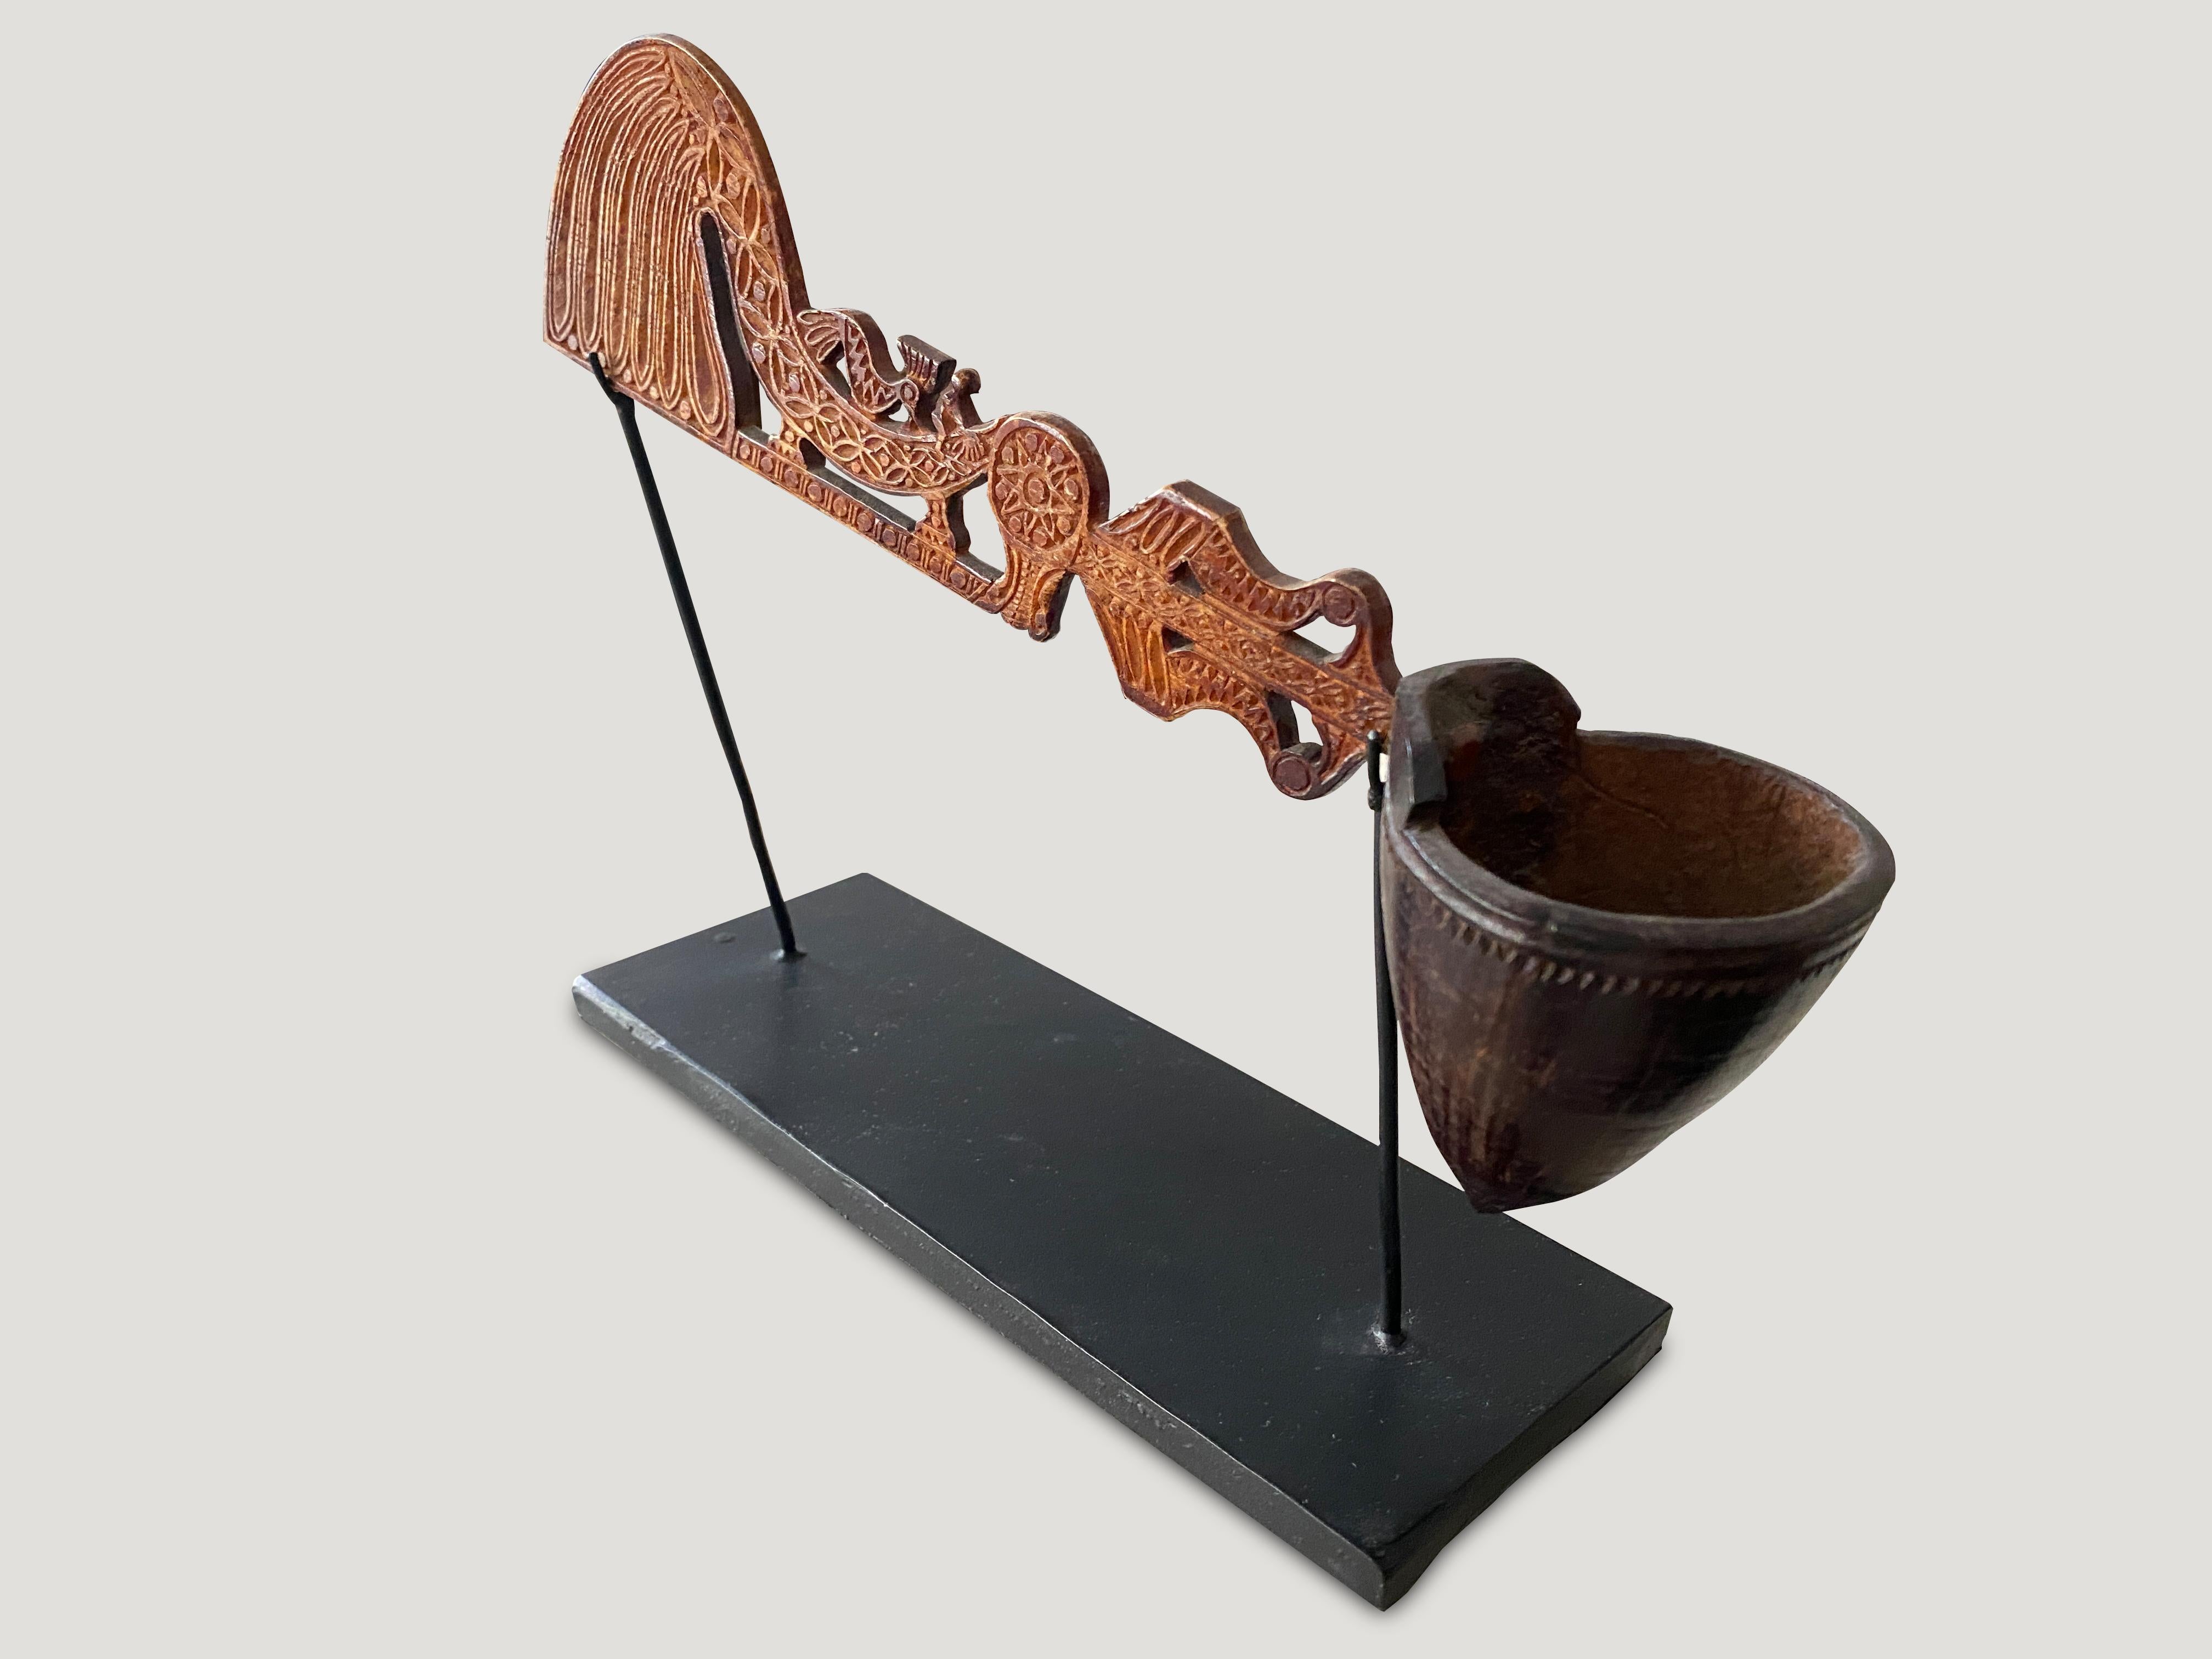 Stunning intricate carving on this hand carved museum quality wooden ladle from Sumatra, circa 1900. Set on a minimalist black metal stand.

This hand carved ladle was sourced in the spirit of wabi-sabi, a Japanese philosophy that beauty can be